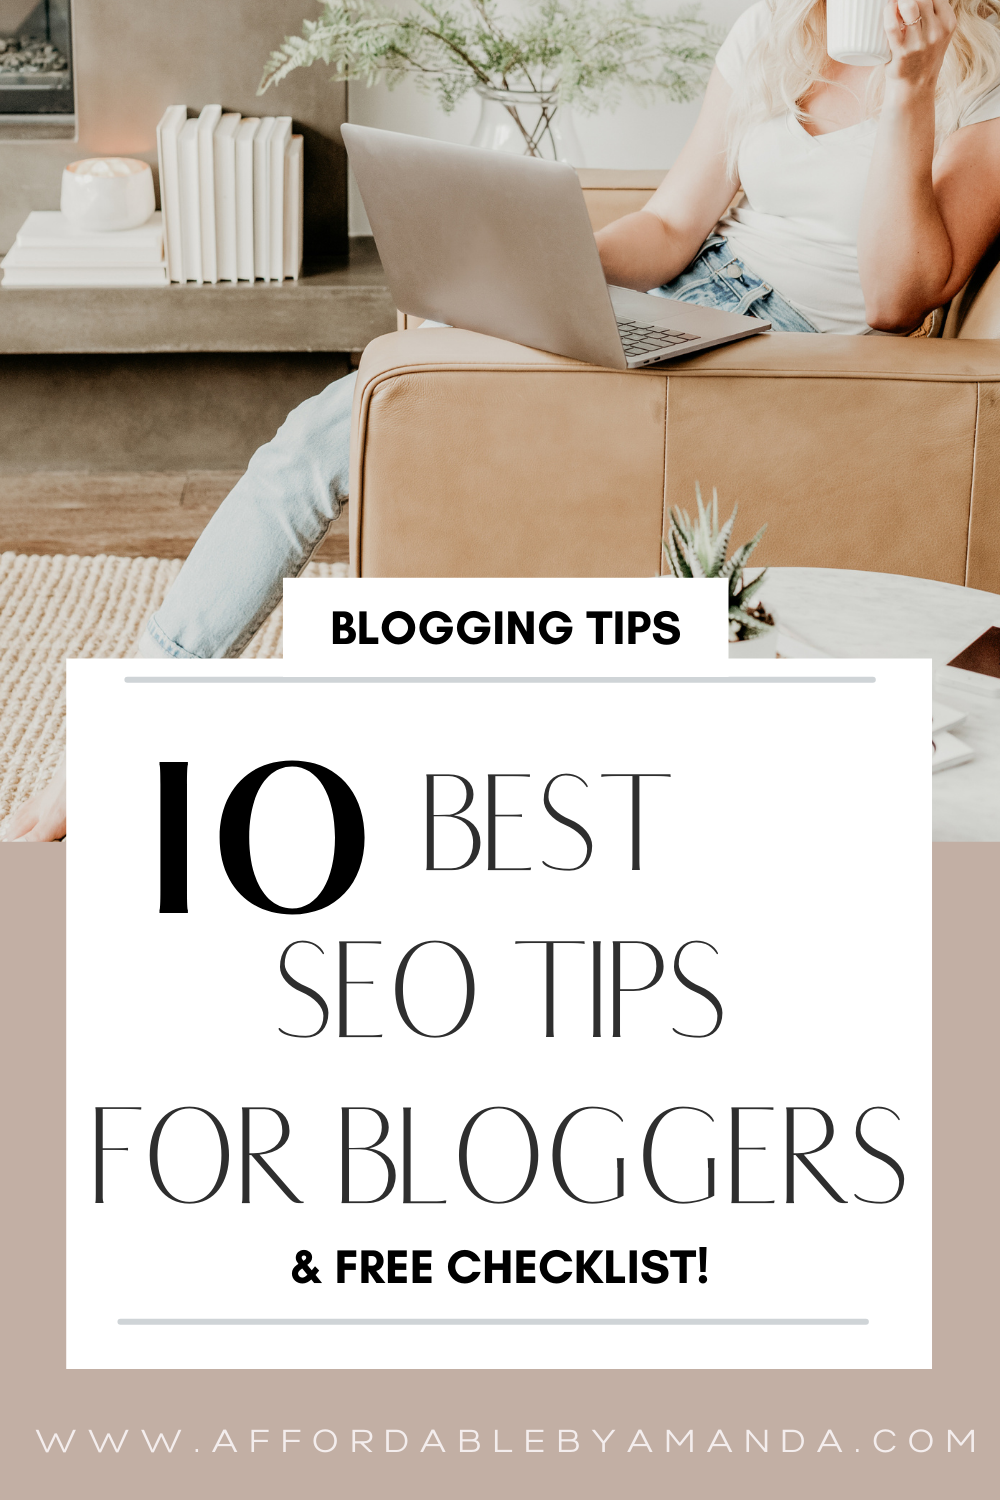 10 Best SEO Tips for Bloggers - Woman wearing white t-shirt sitting on brown couch with her laptop.